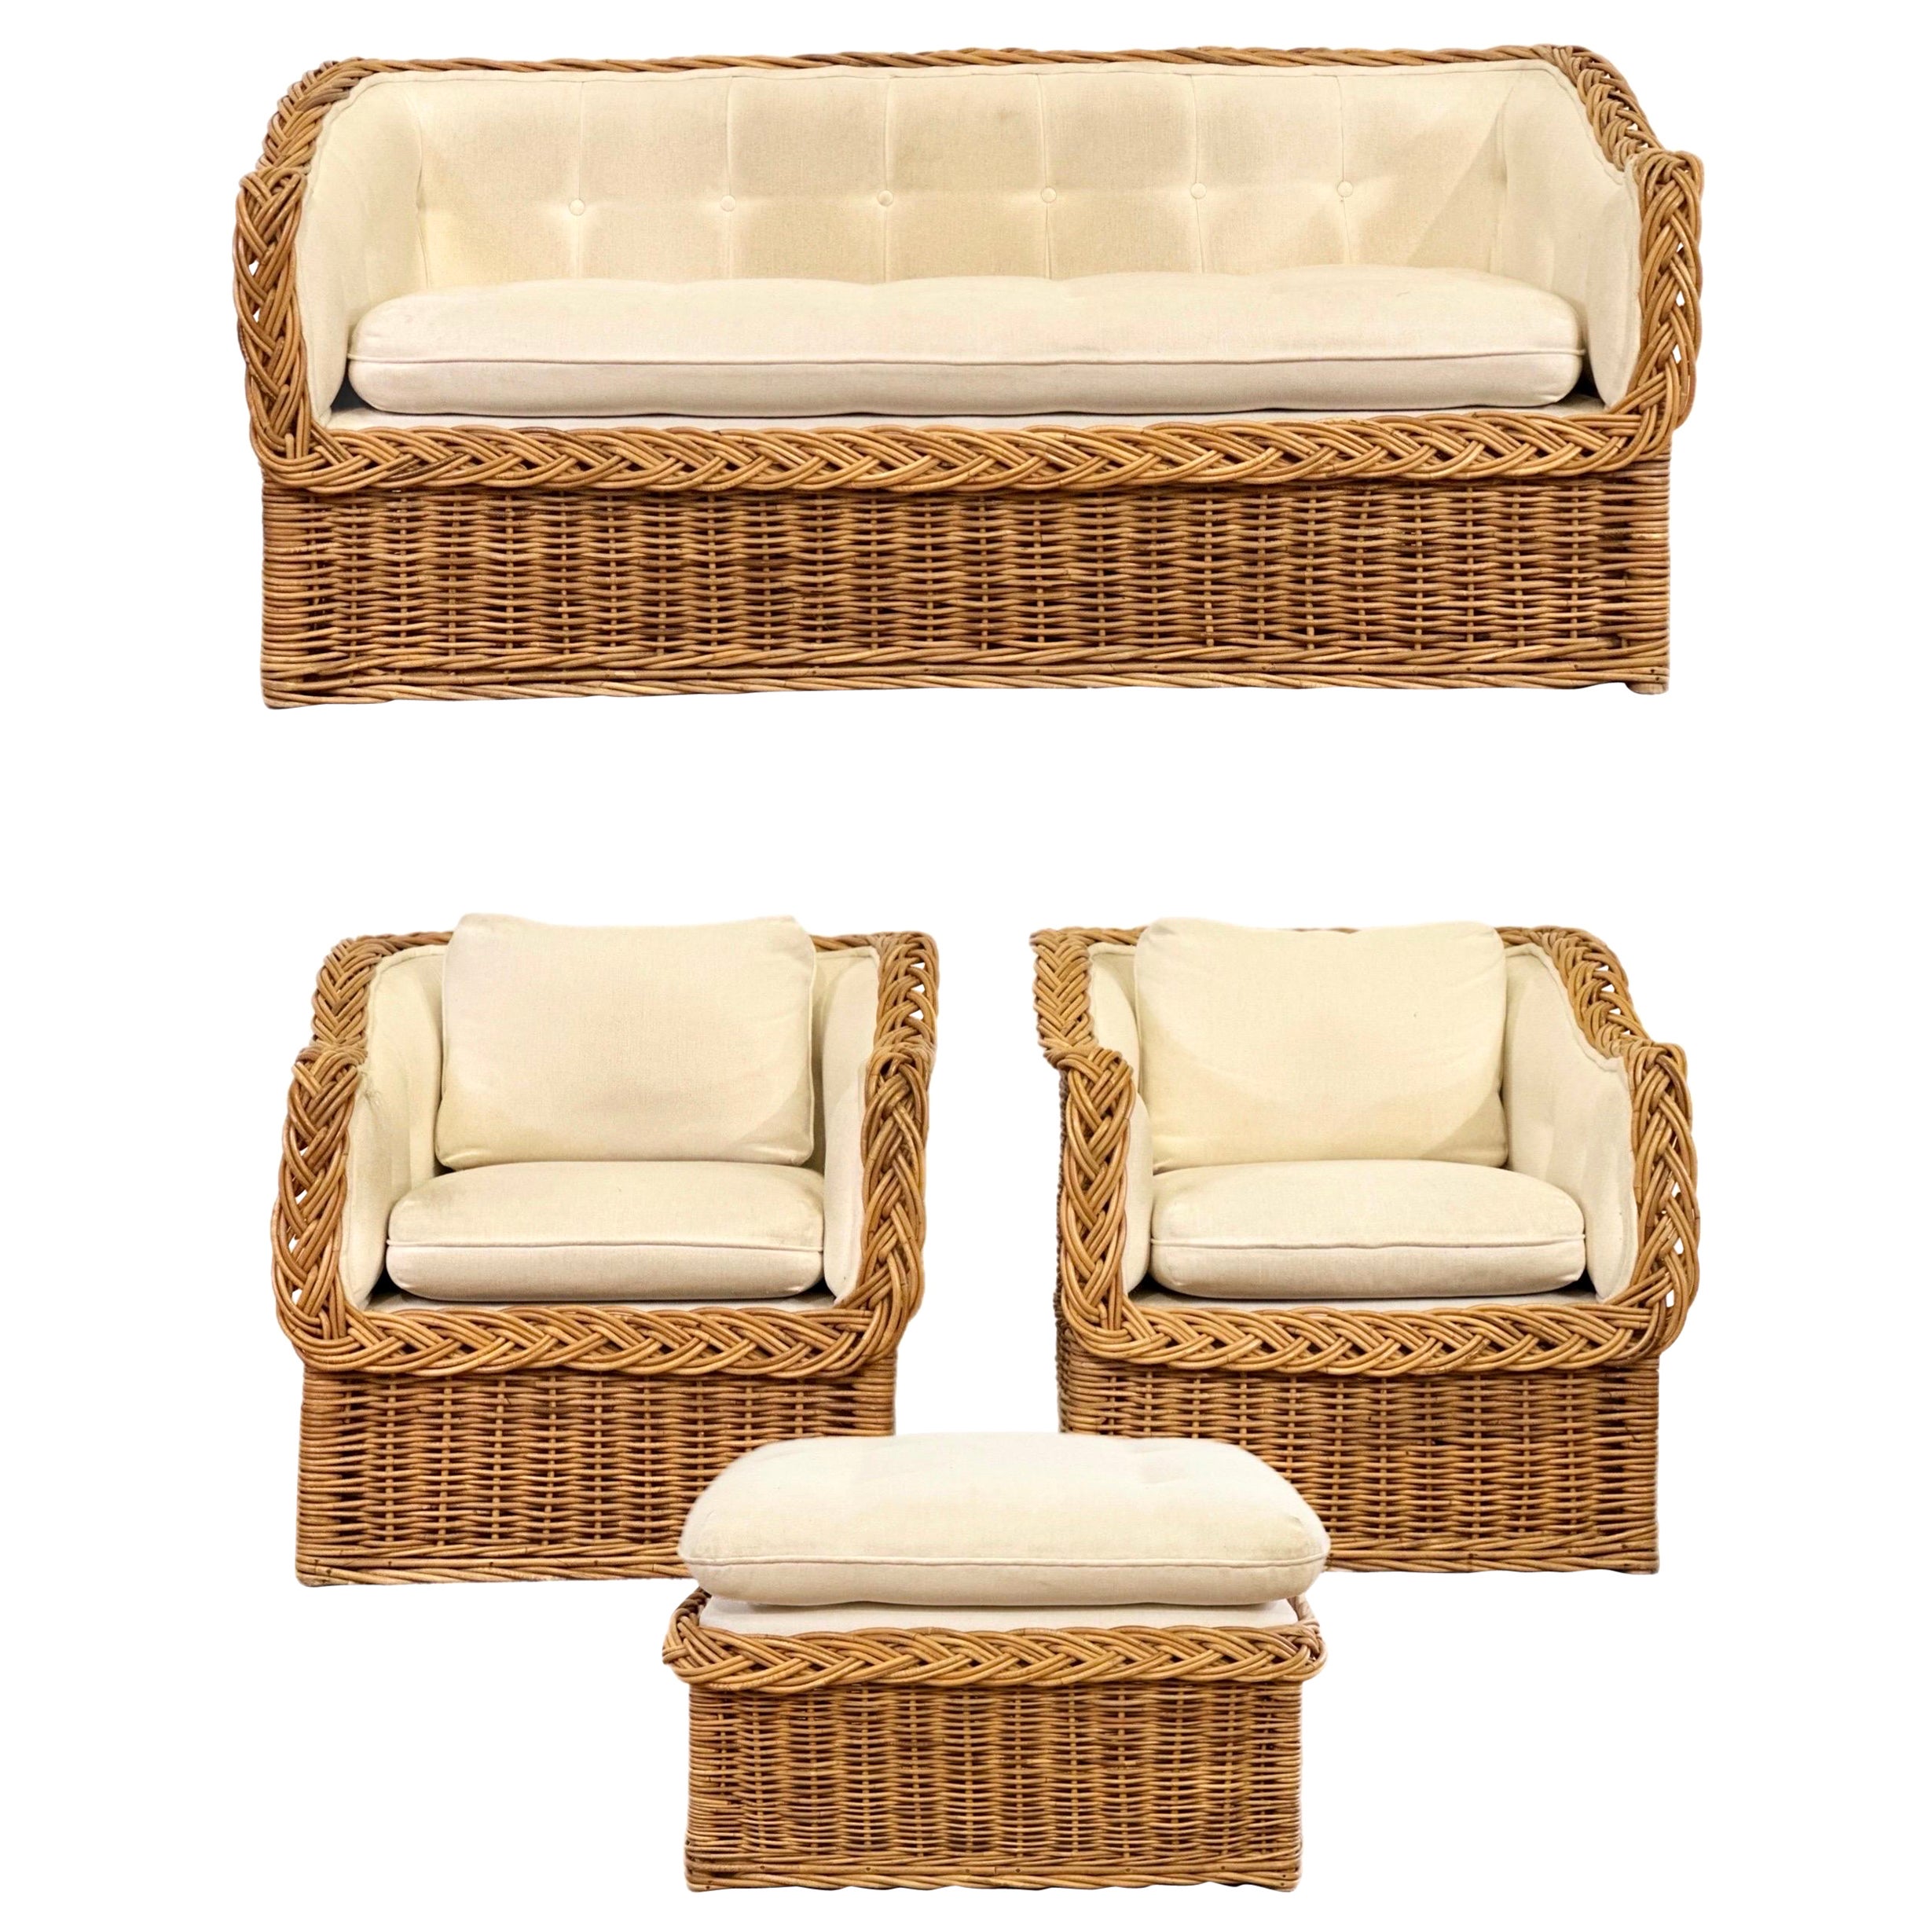 Italian Wicker Works Rattan Living Room Set - 4 Pieces  For Sale